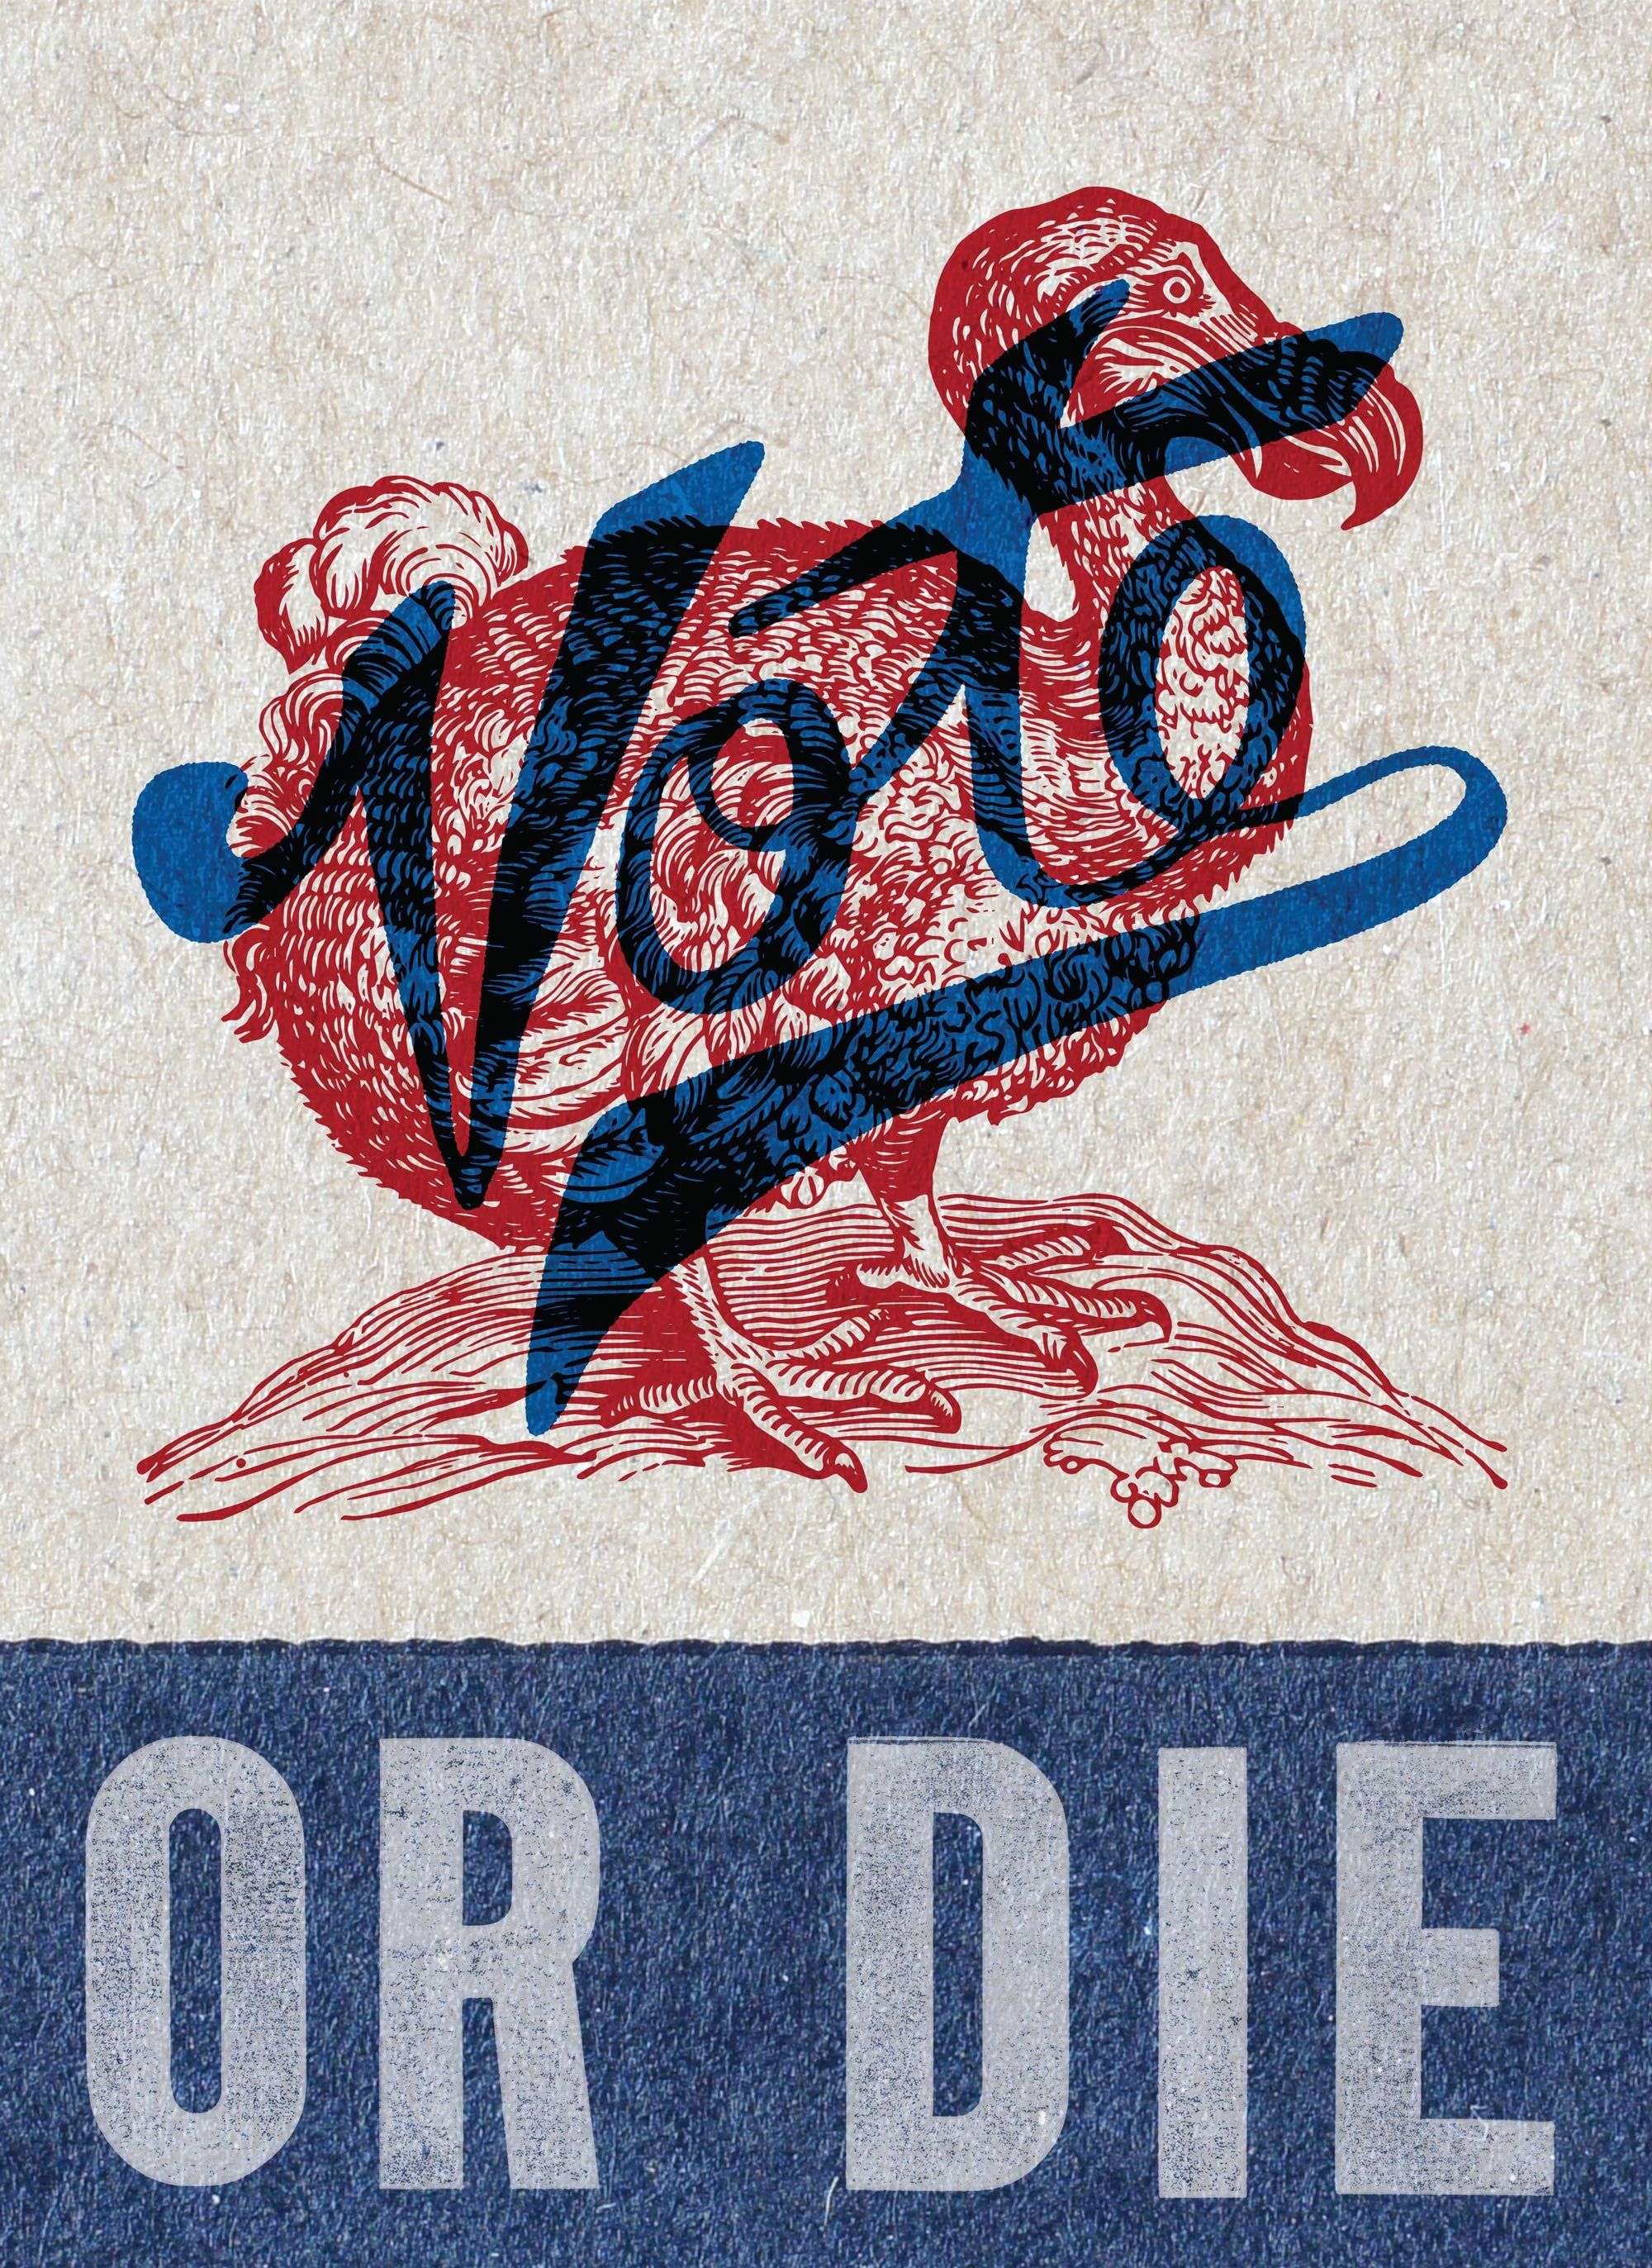 Gallery: Posters that will make you want to go vote